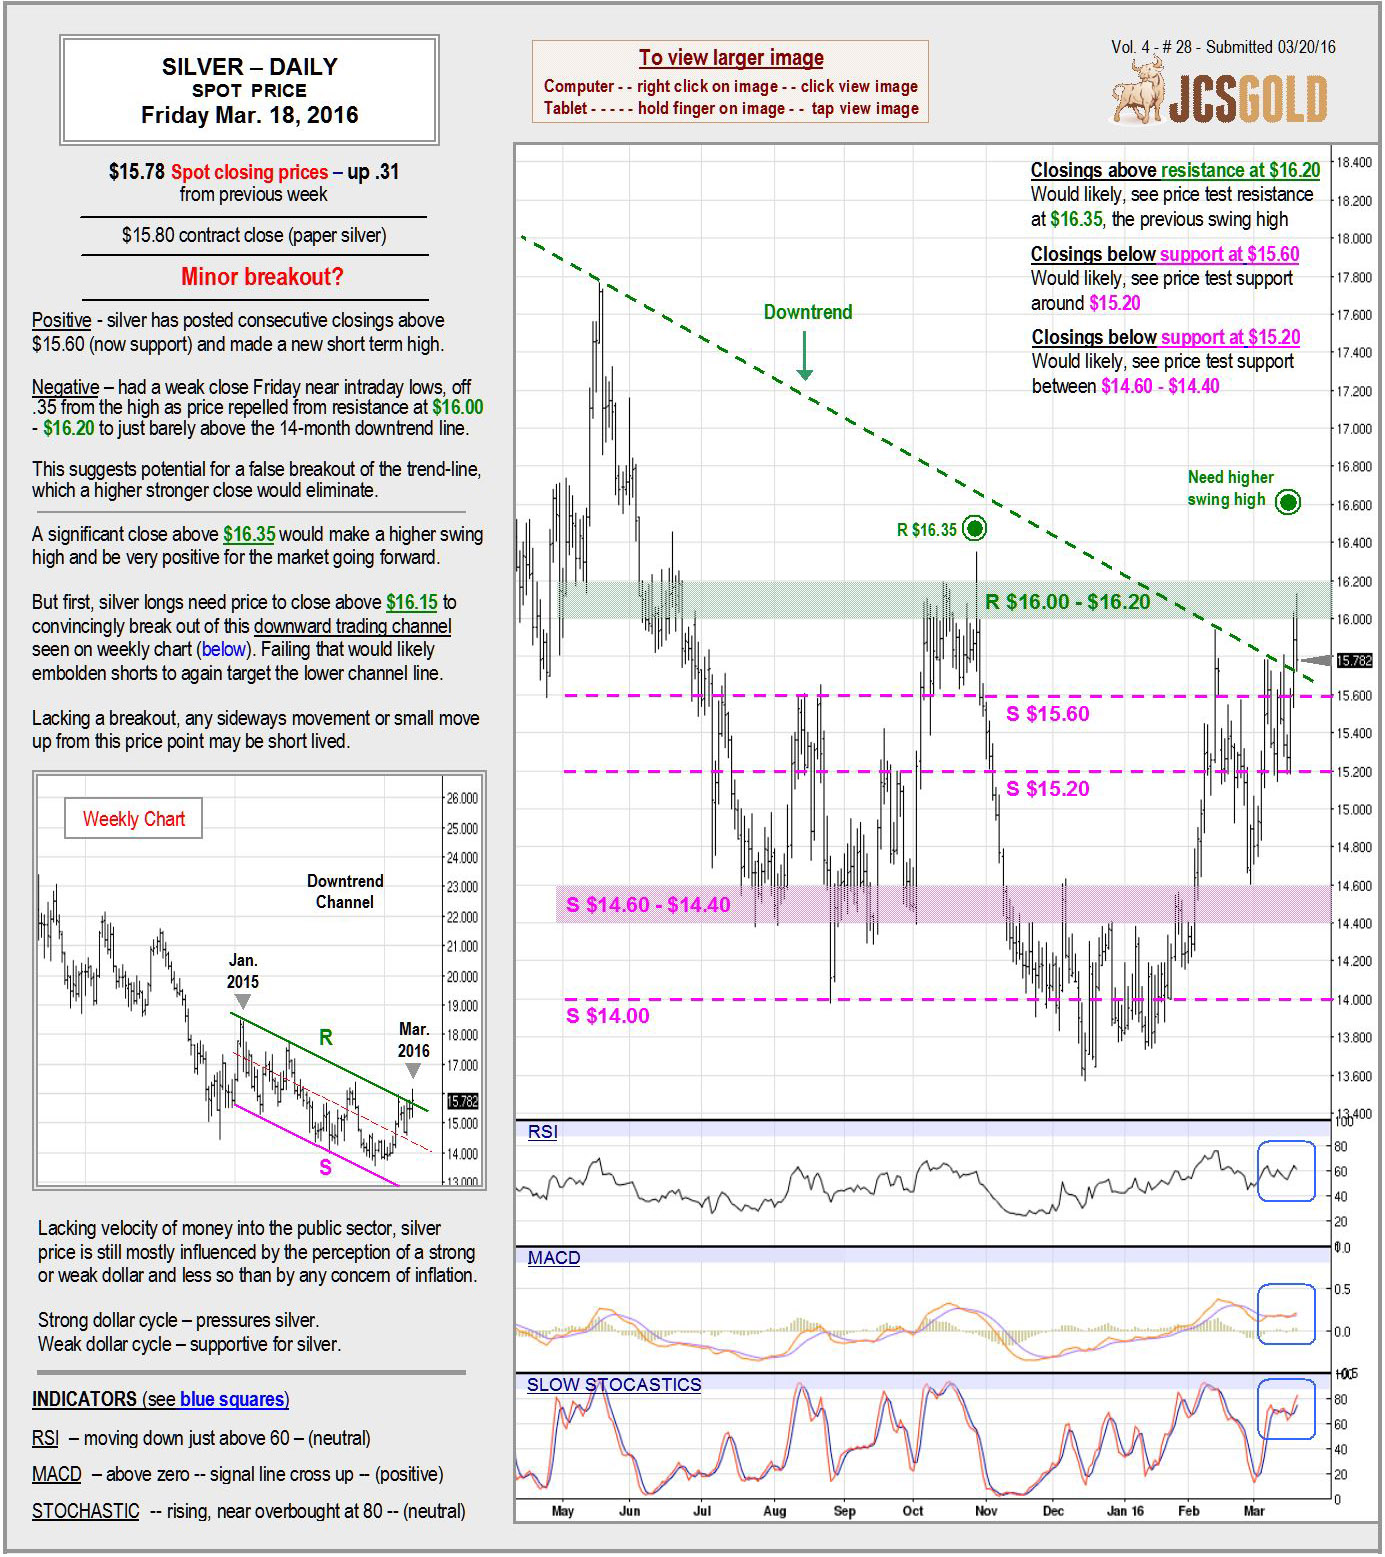 Mar 18, 2016 chart & commentary